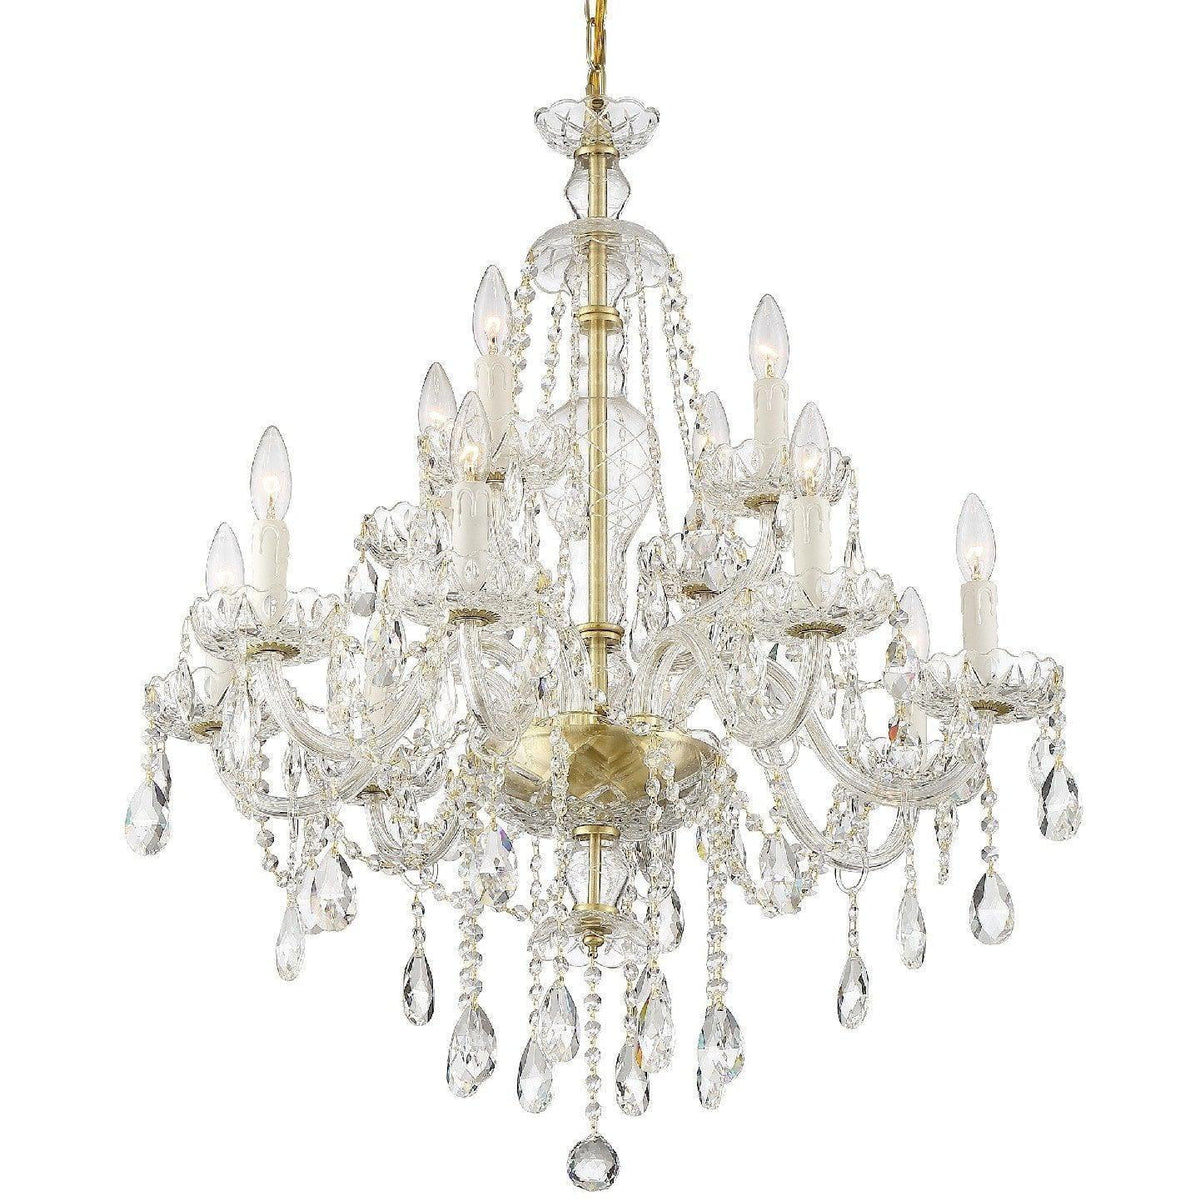 Crystorama - Candace 12 Light Chandelier - CAN-A1312-PB-CL-S | Montreal Lighting & Hardware